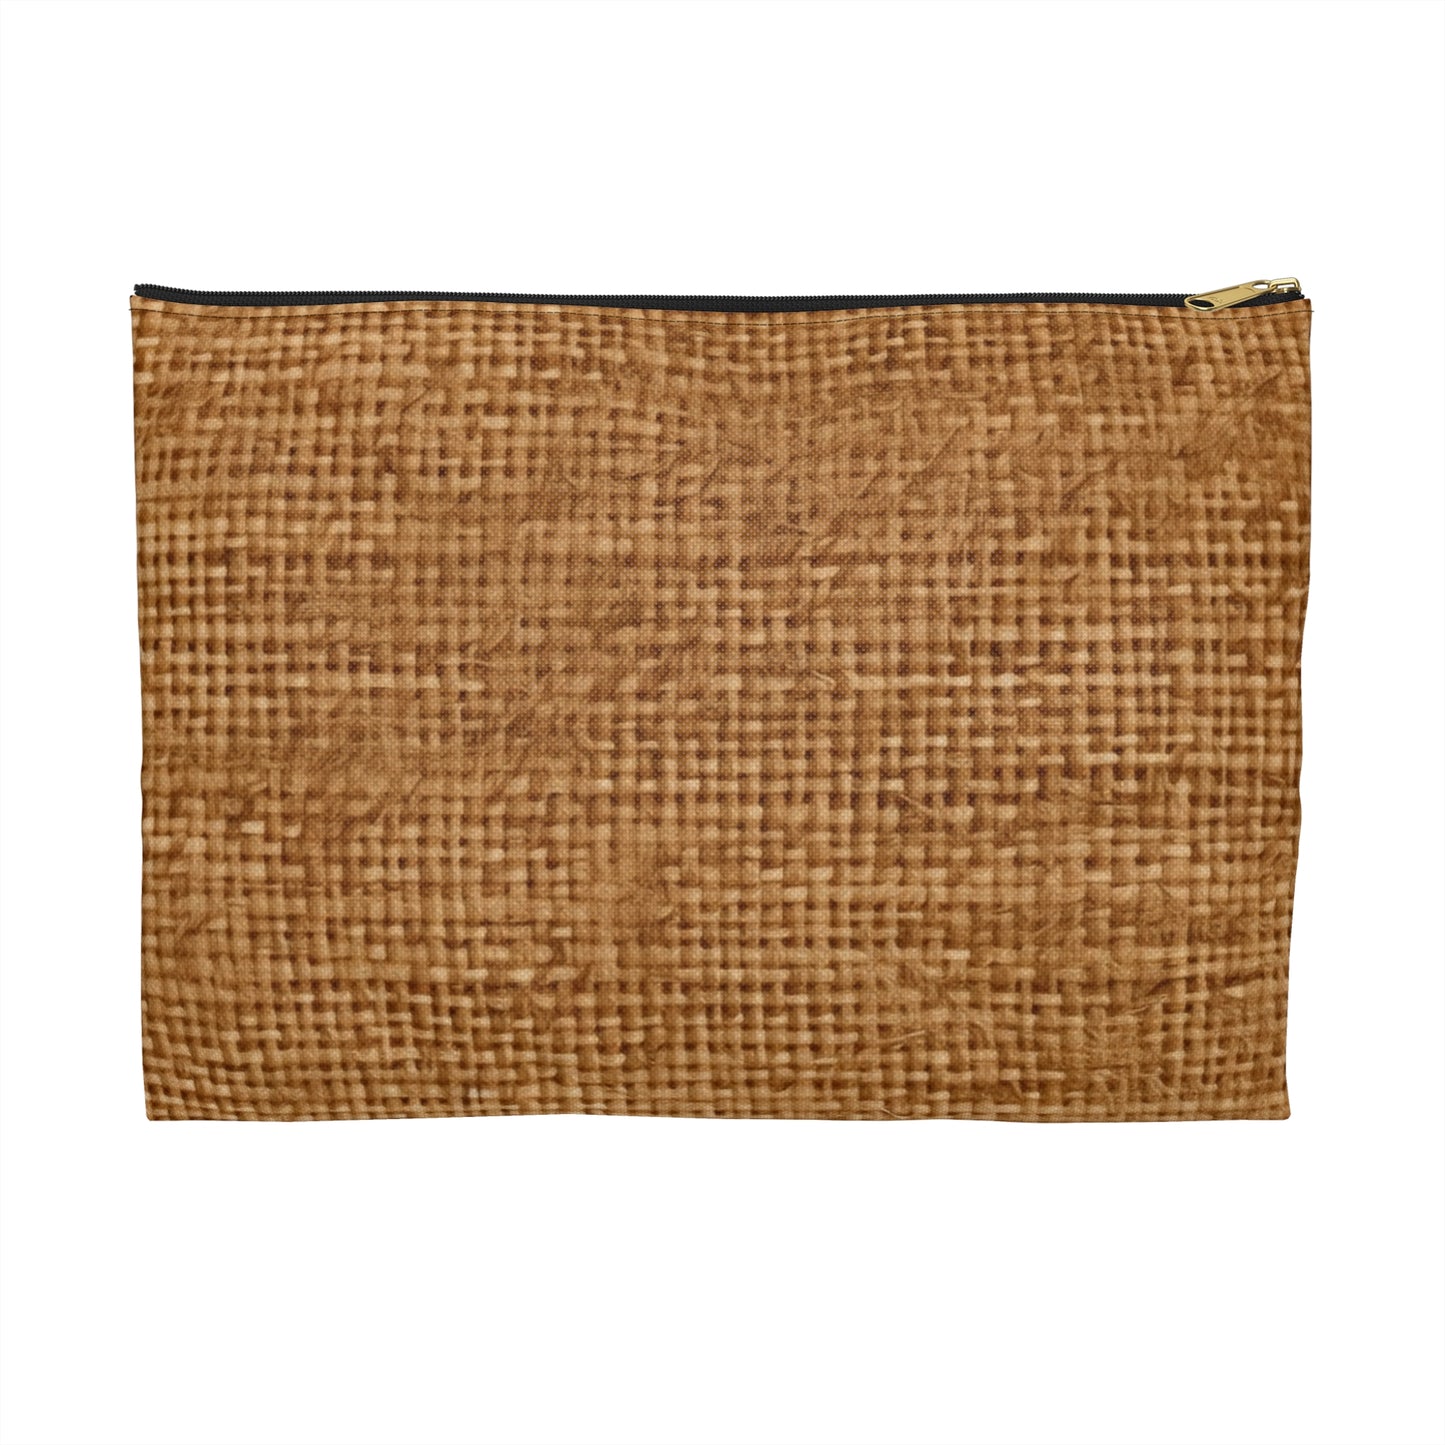 Brown Light Chocolate: Denim-Inspired Elegant Fabric - Accessory Pouch